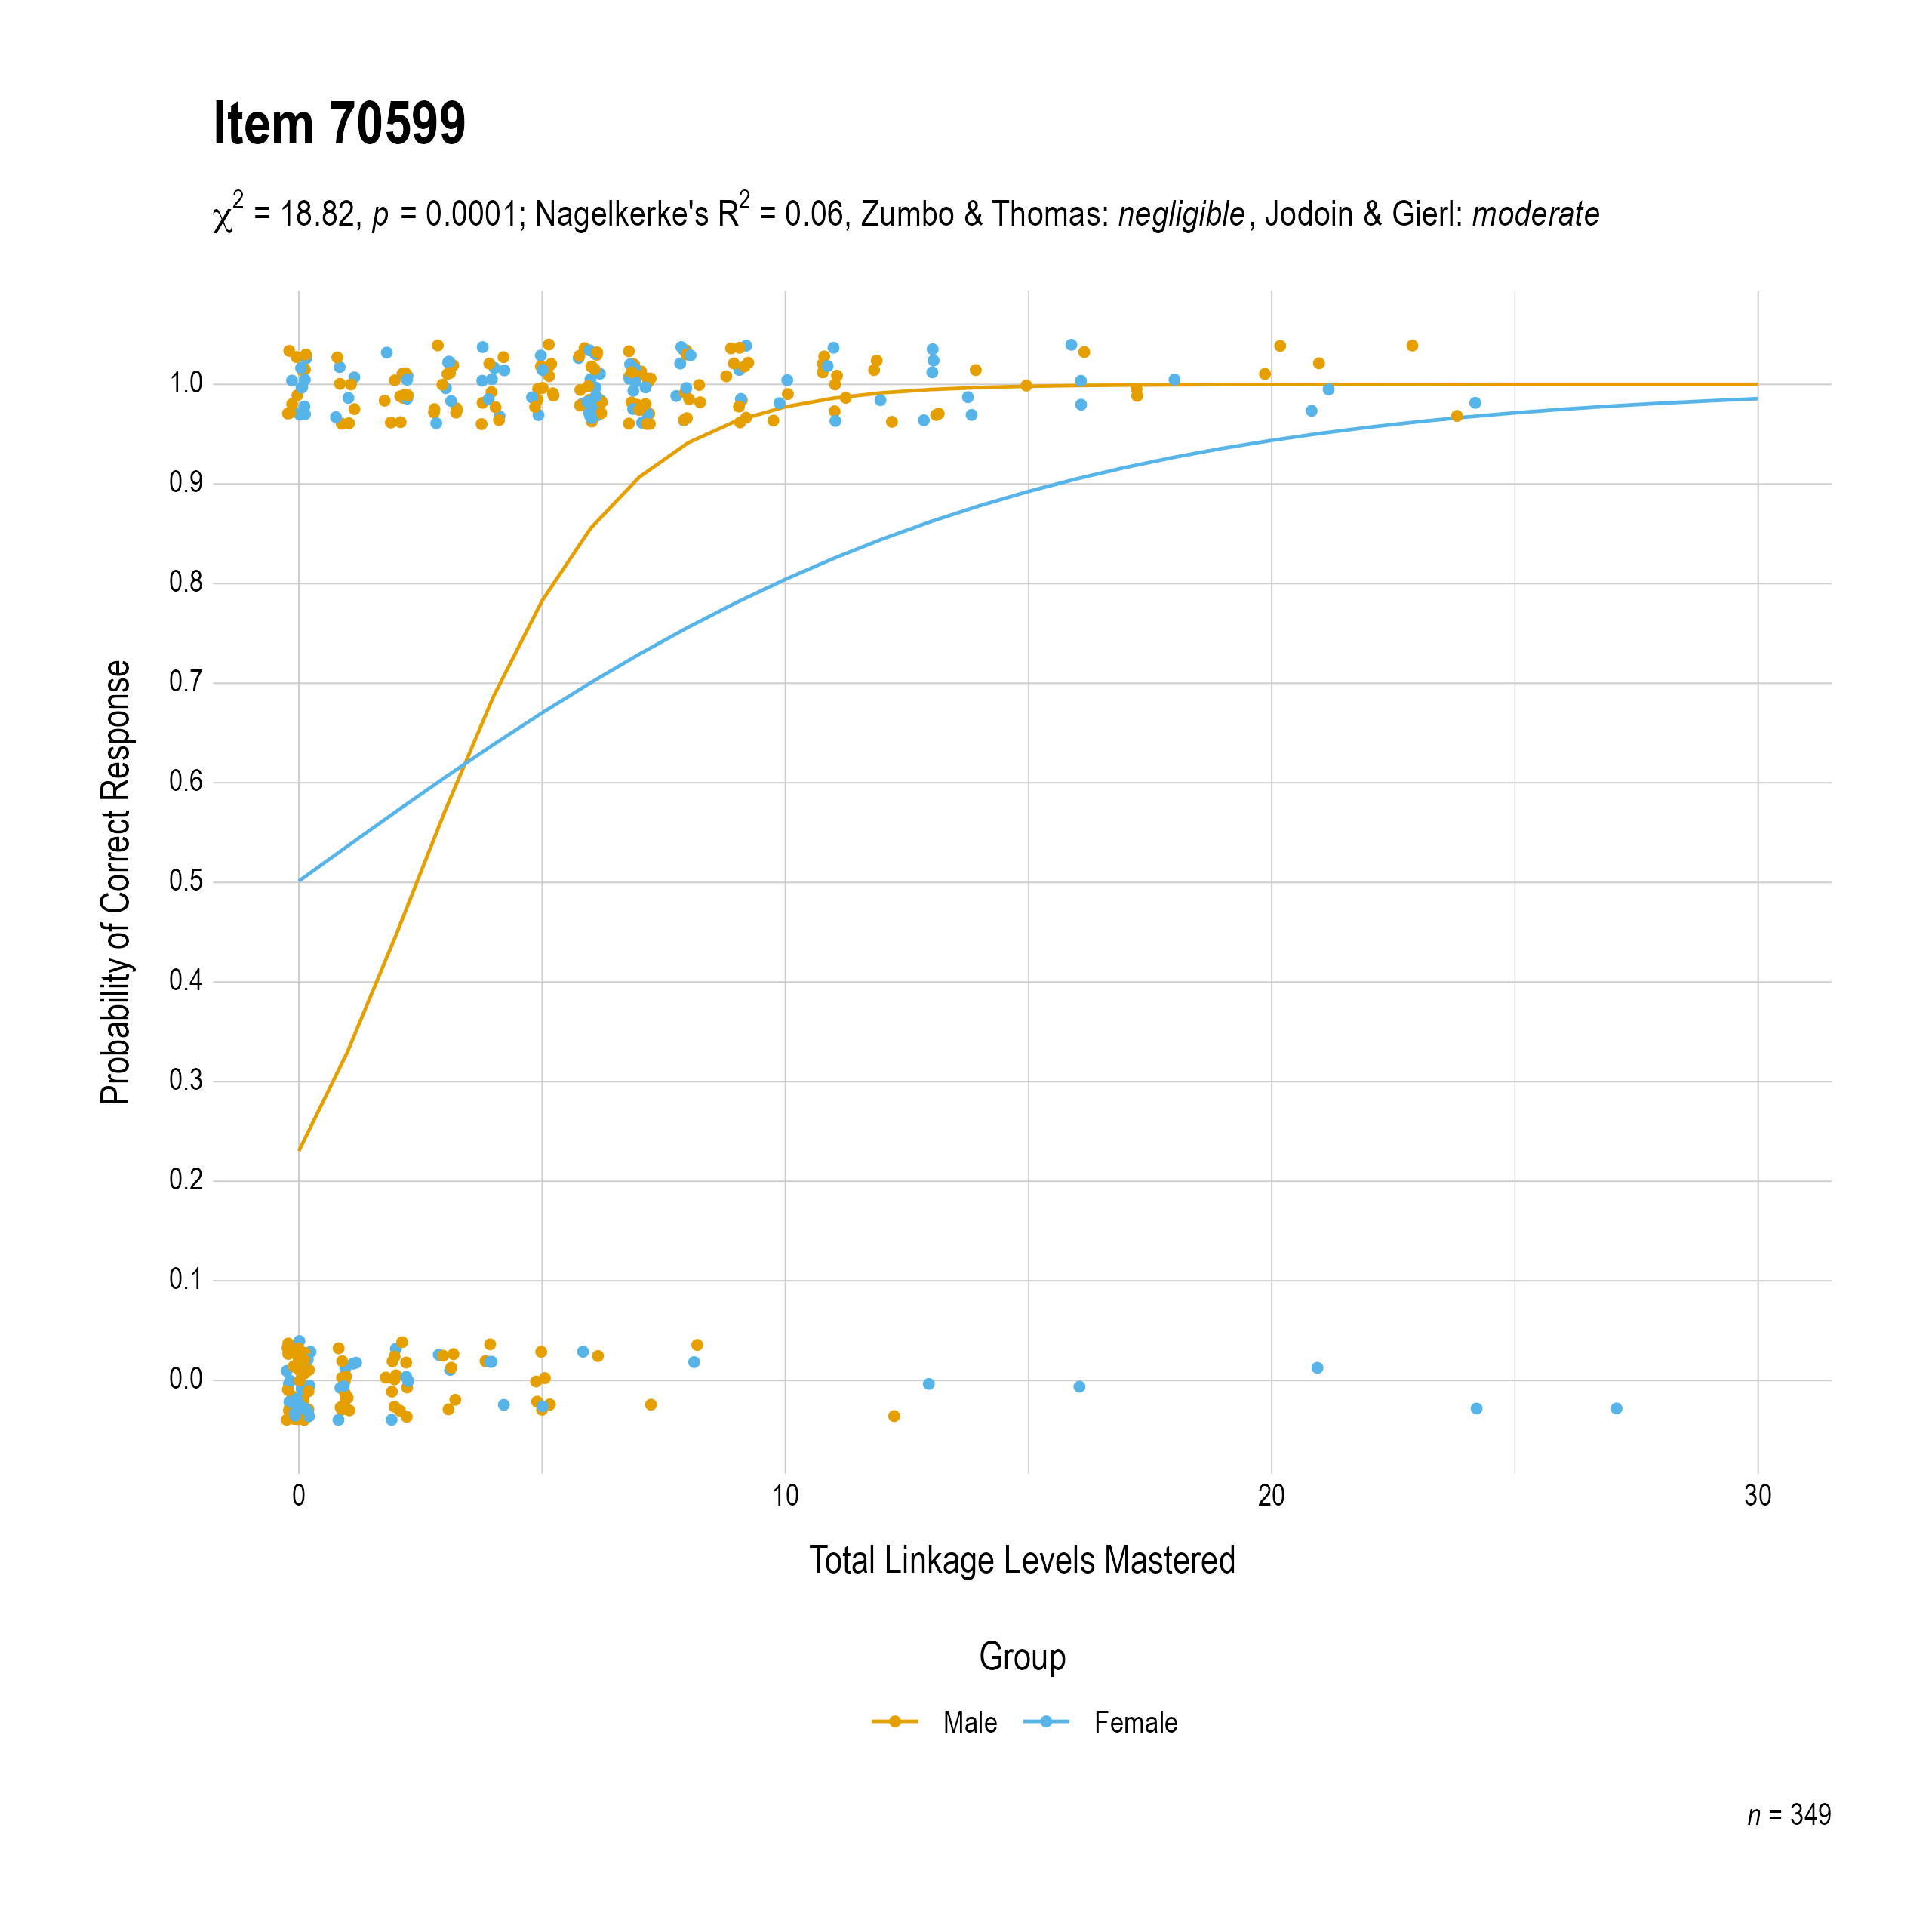 The plot of the combined gender differential item function evidence for Mathematics item 70599. The figure contains points shaded by group. The figure also contains a logistic regression curve for each group. The total linkage levels mastered in is on the x-axis, and the probability of a correct response is on the y-axis.